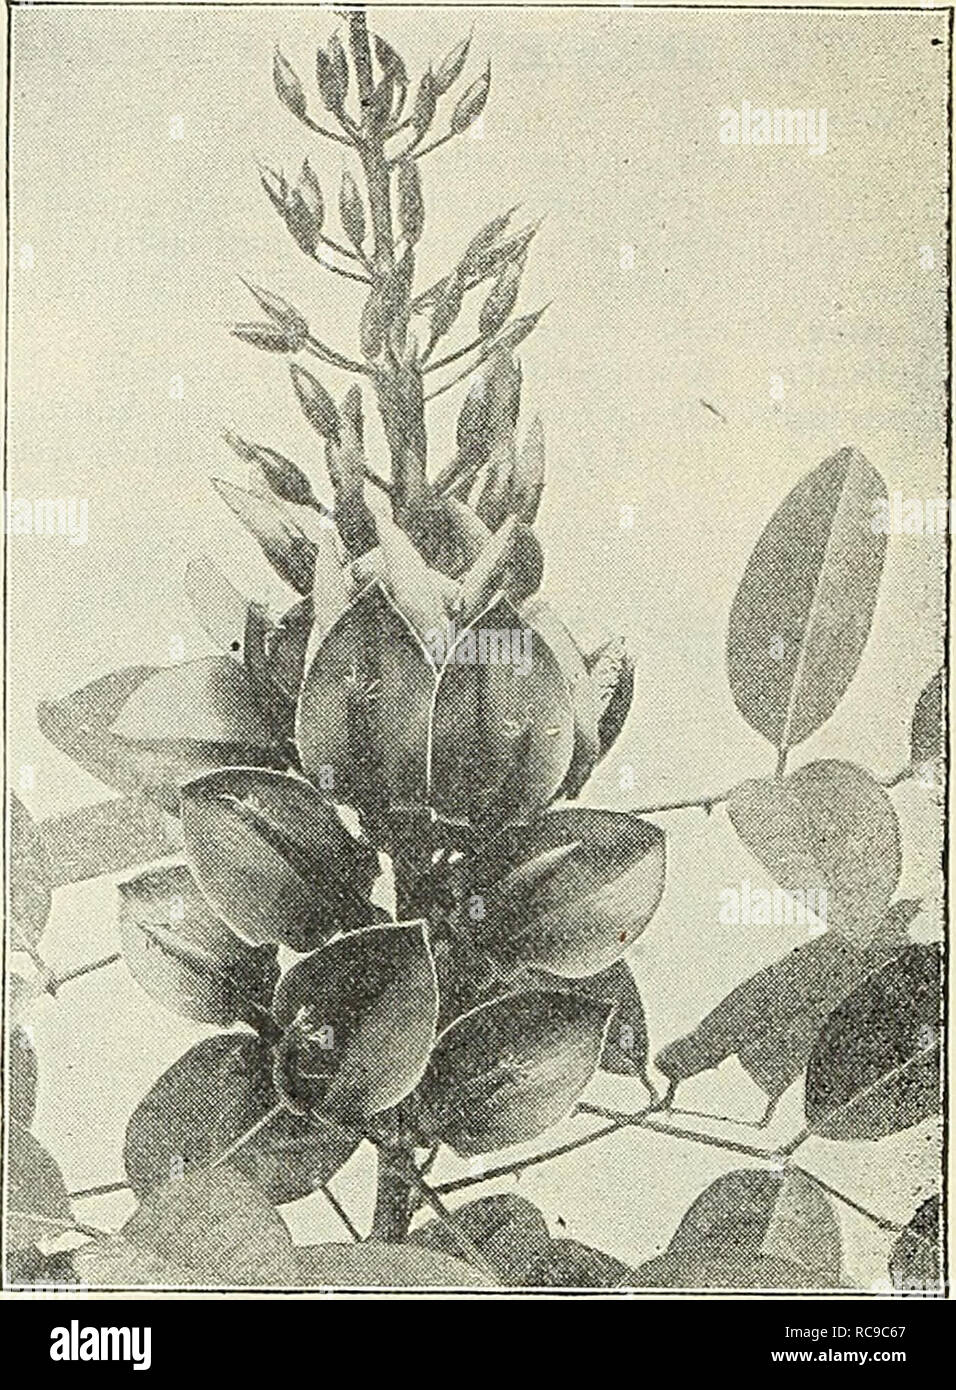 . Dreer's garden book : 1904. Seeds Catalogs; Nursery stock Catalogs; Gardening Equipment and supplies Catalogs; Flowers Seeds Catalogs; Vegetables Seeds Catalogs; Fruit Seeds Catalogs. . lAH lÂ« 11 I;|'I.-^ ^'lIiK^l 'NI. New Dwarf Coral Plant. Neiiv Boston Sword Fern, or Ostricli Plume Fern. (Nephrolepis Piersoni.) This new Fern was introduced last spring as the most important addition to this line of plants in many years. The plant possesses the same vigorous growth that is characteristic of the Boston Fern, wiih long, graceful fronds, but with each ]3innjB or leaflet subdi- vided so as to  Stock Photo